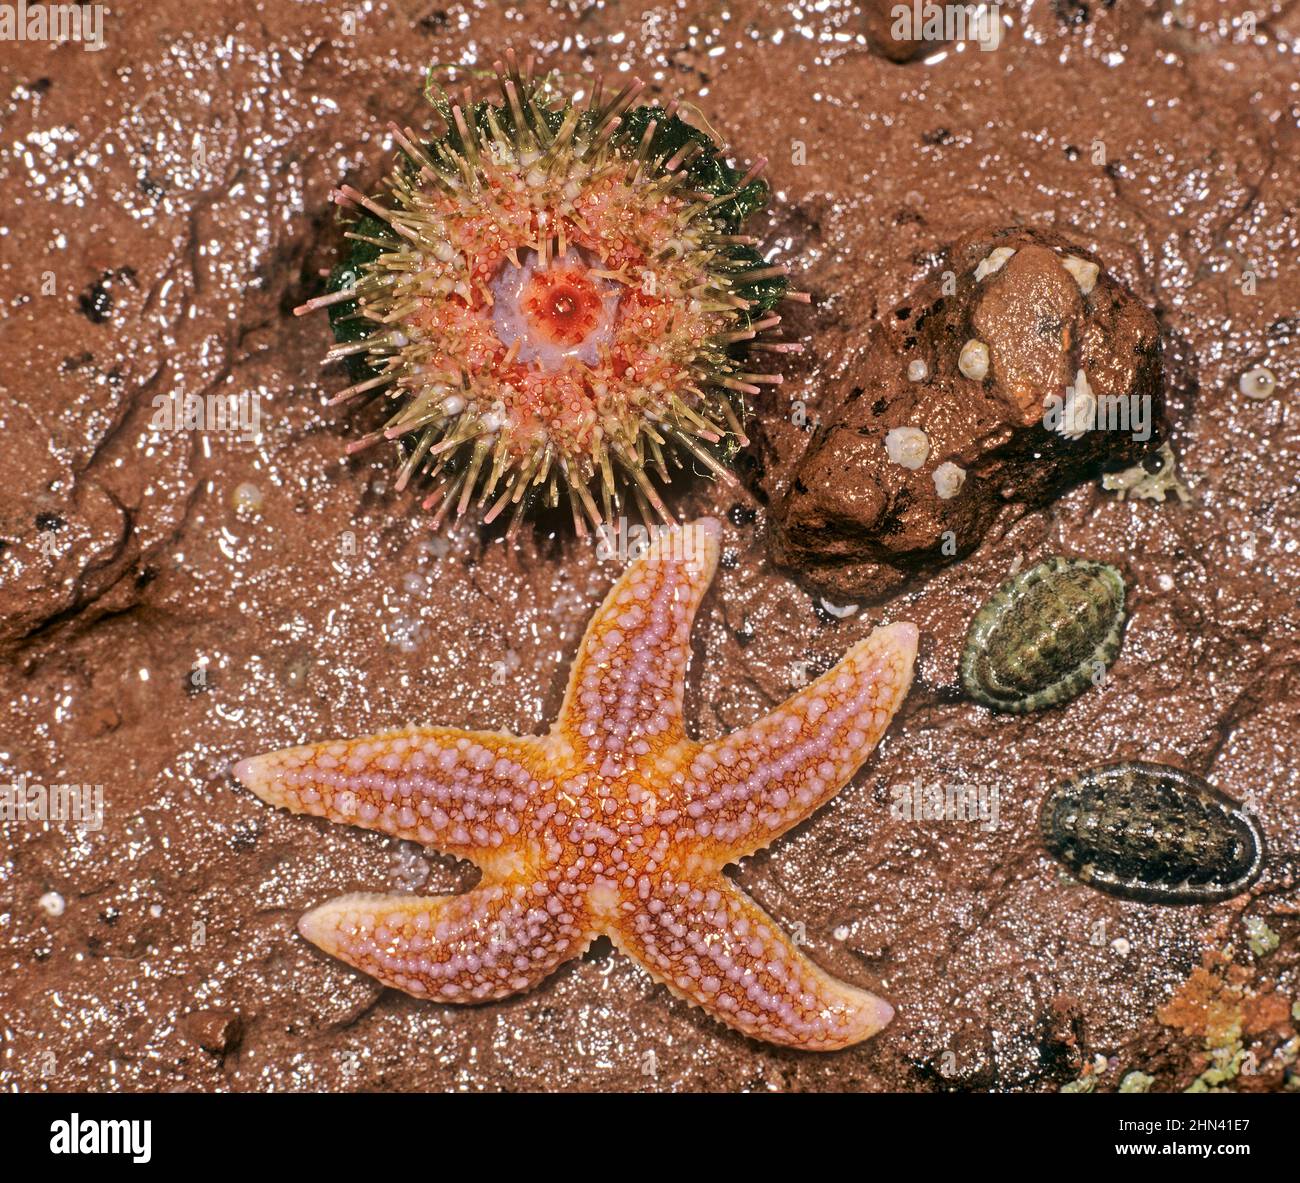 Green Sea Urchin (Psammechinus miliaris, underside), Common Starfish (Asterias rubens) and two Common Chitons (Lepidochiton cinerea) at low tide on a rocky beach. Great Britain.. Stock Photo